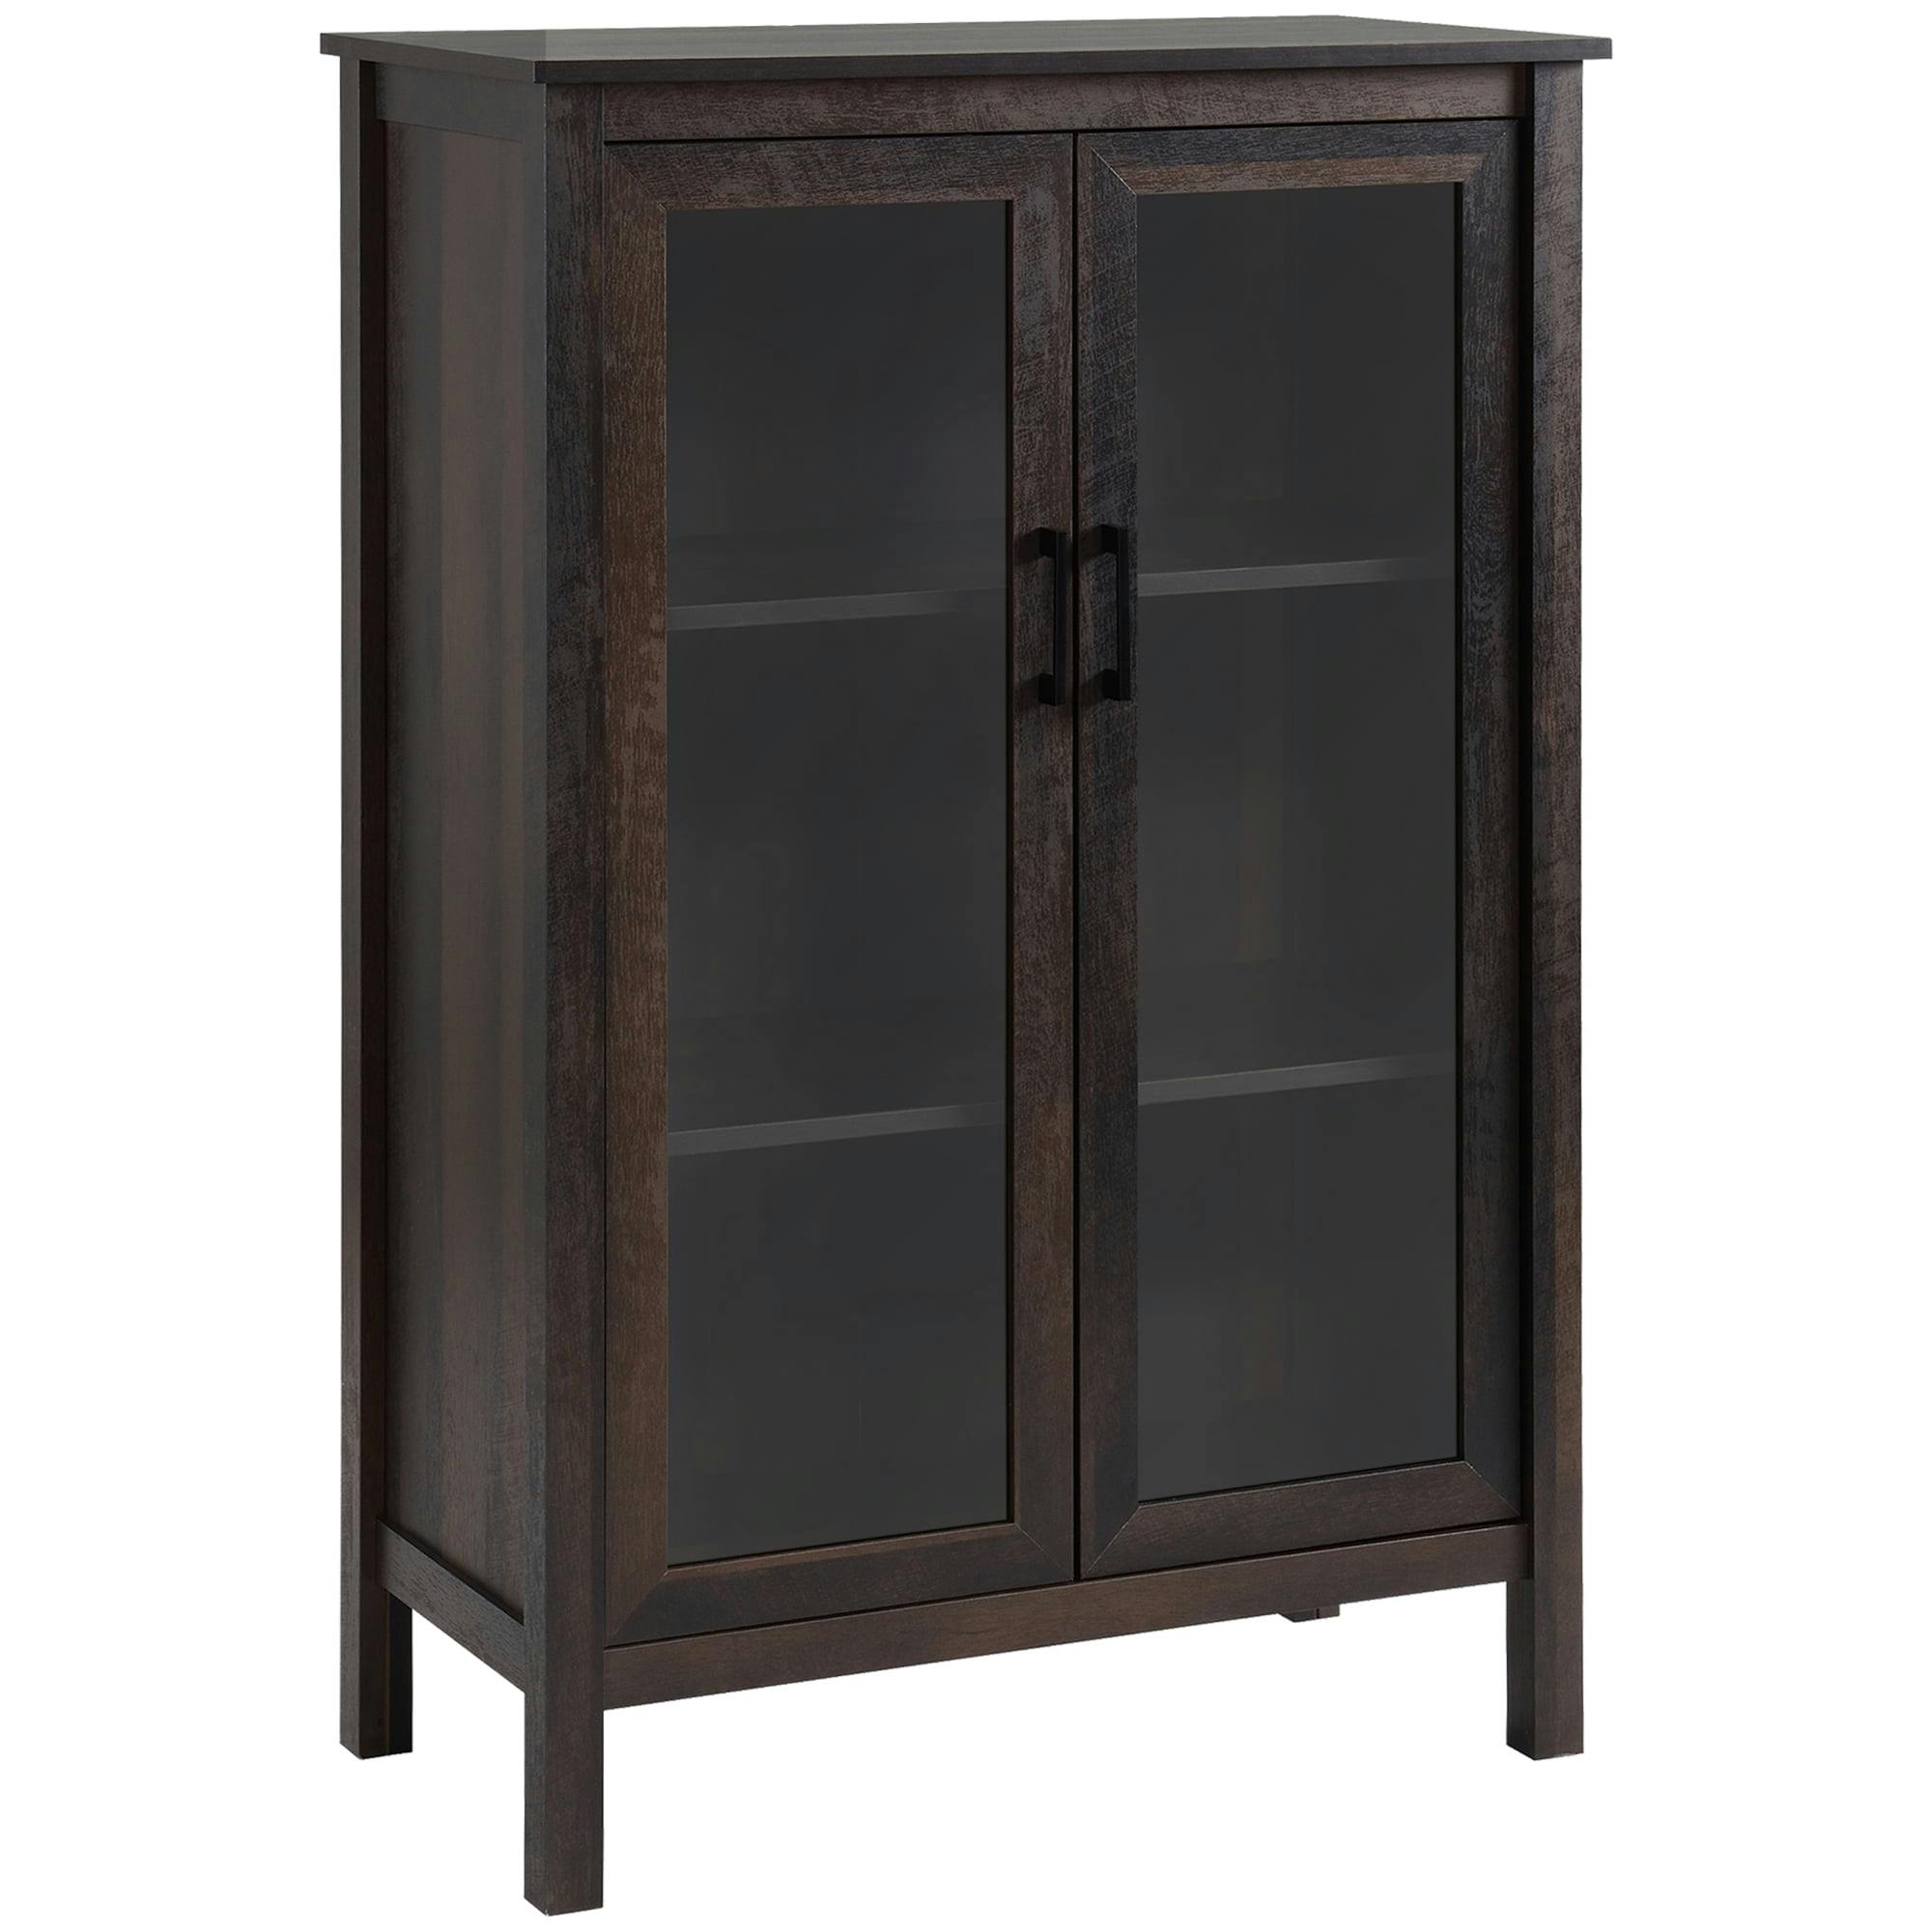 Chic Brown Sideboard with Adjustable Glass Shelves and Double Doors